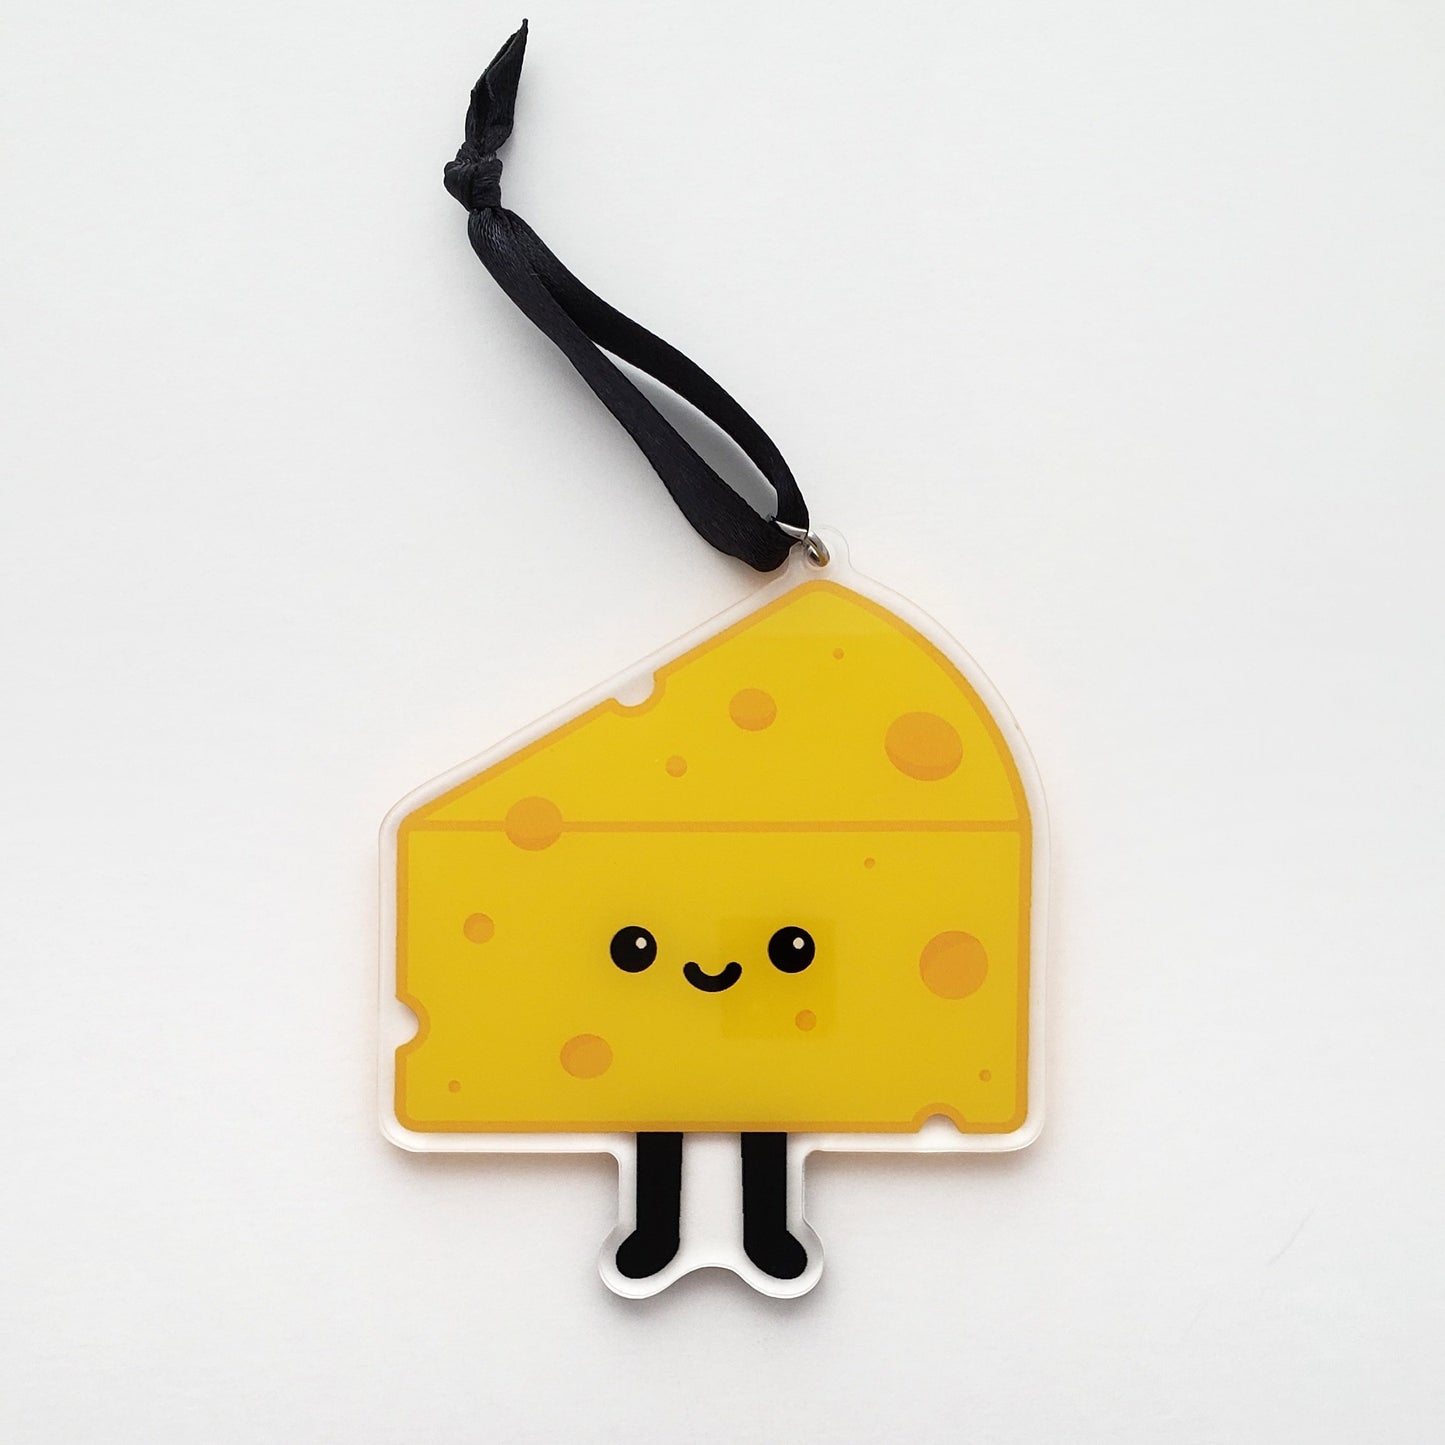 Cheese Stands Alone ornament